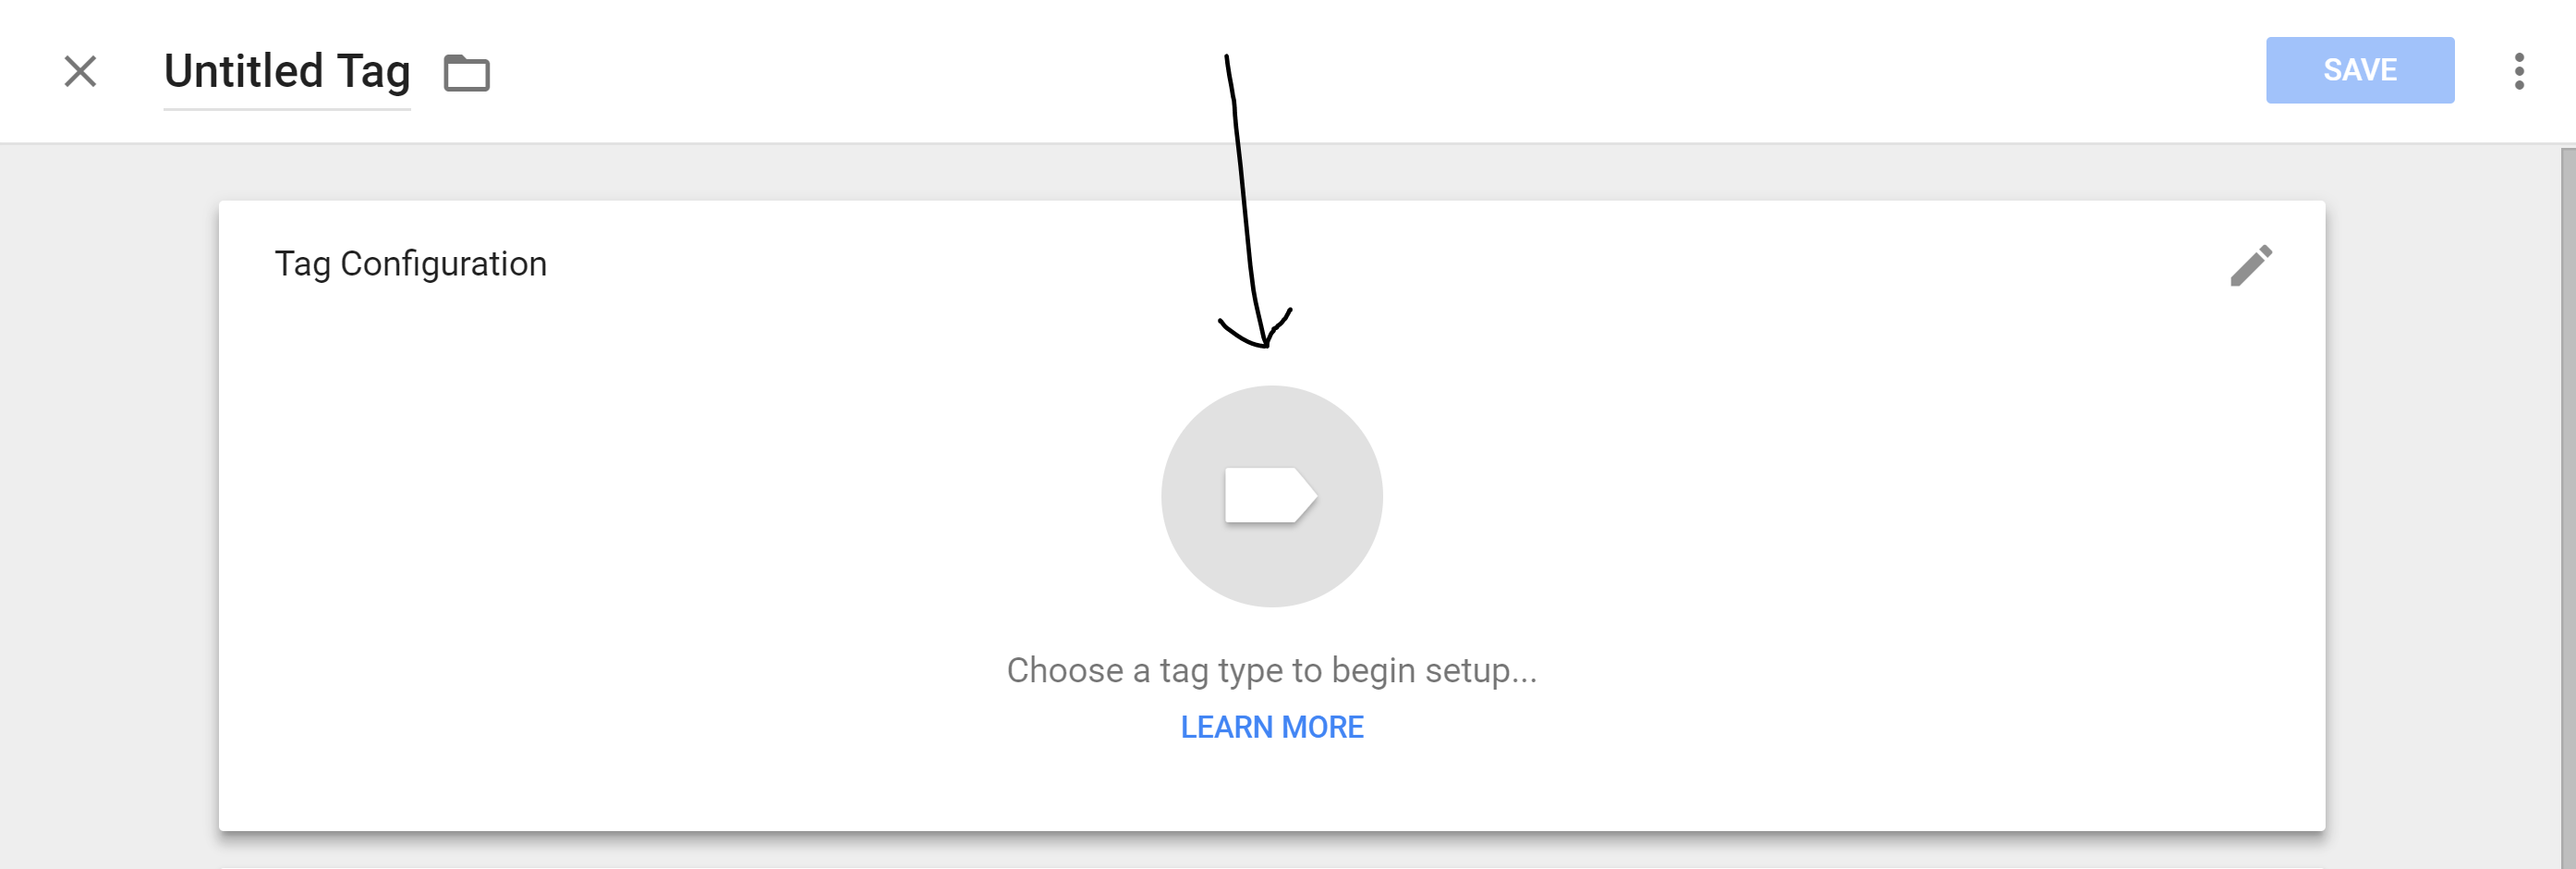 Click the tag icon to begin setup.